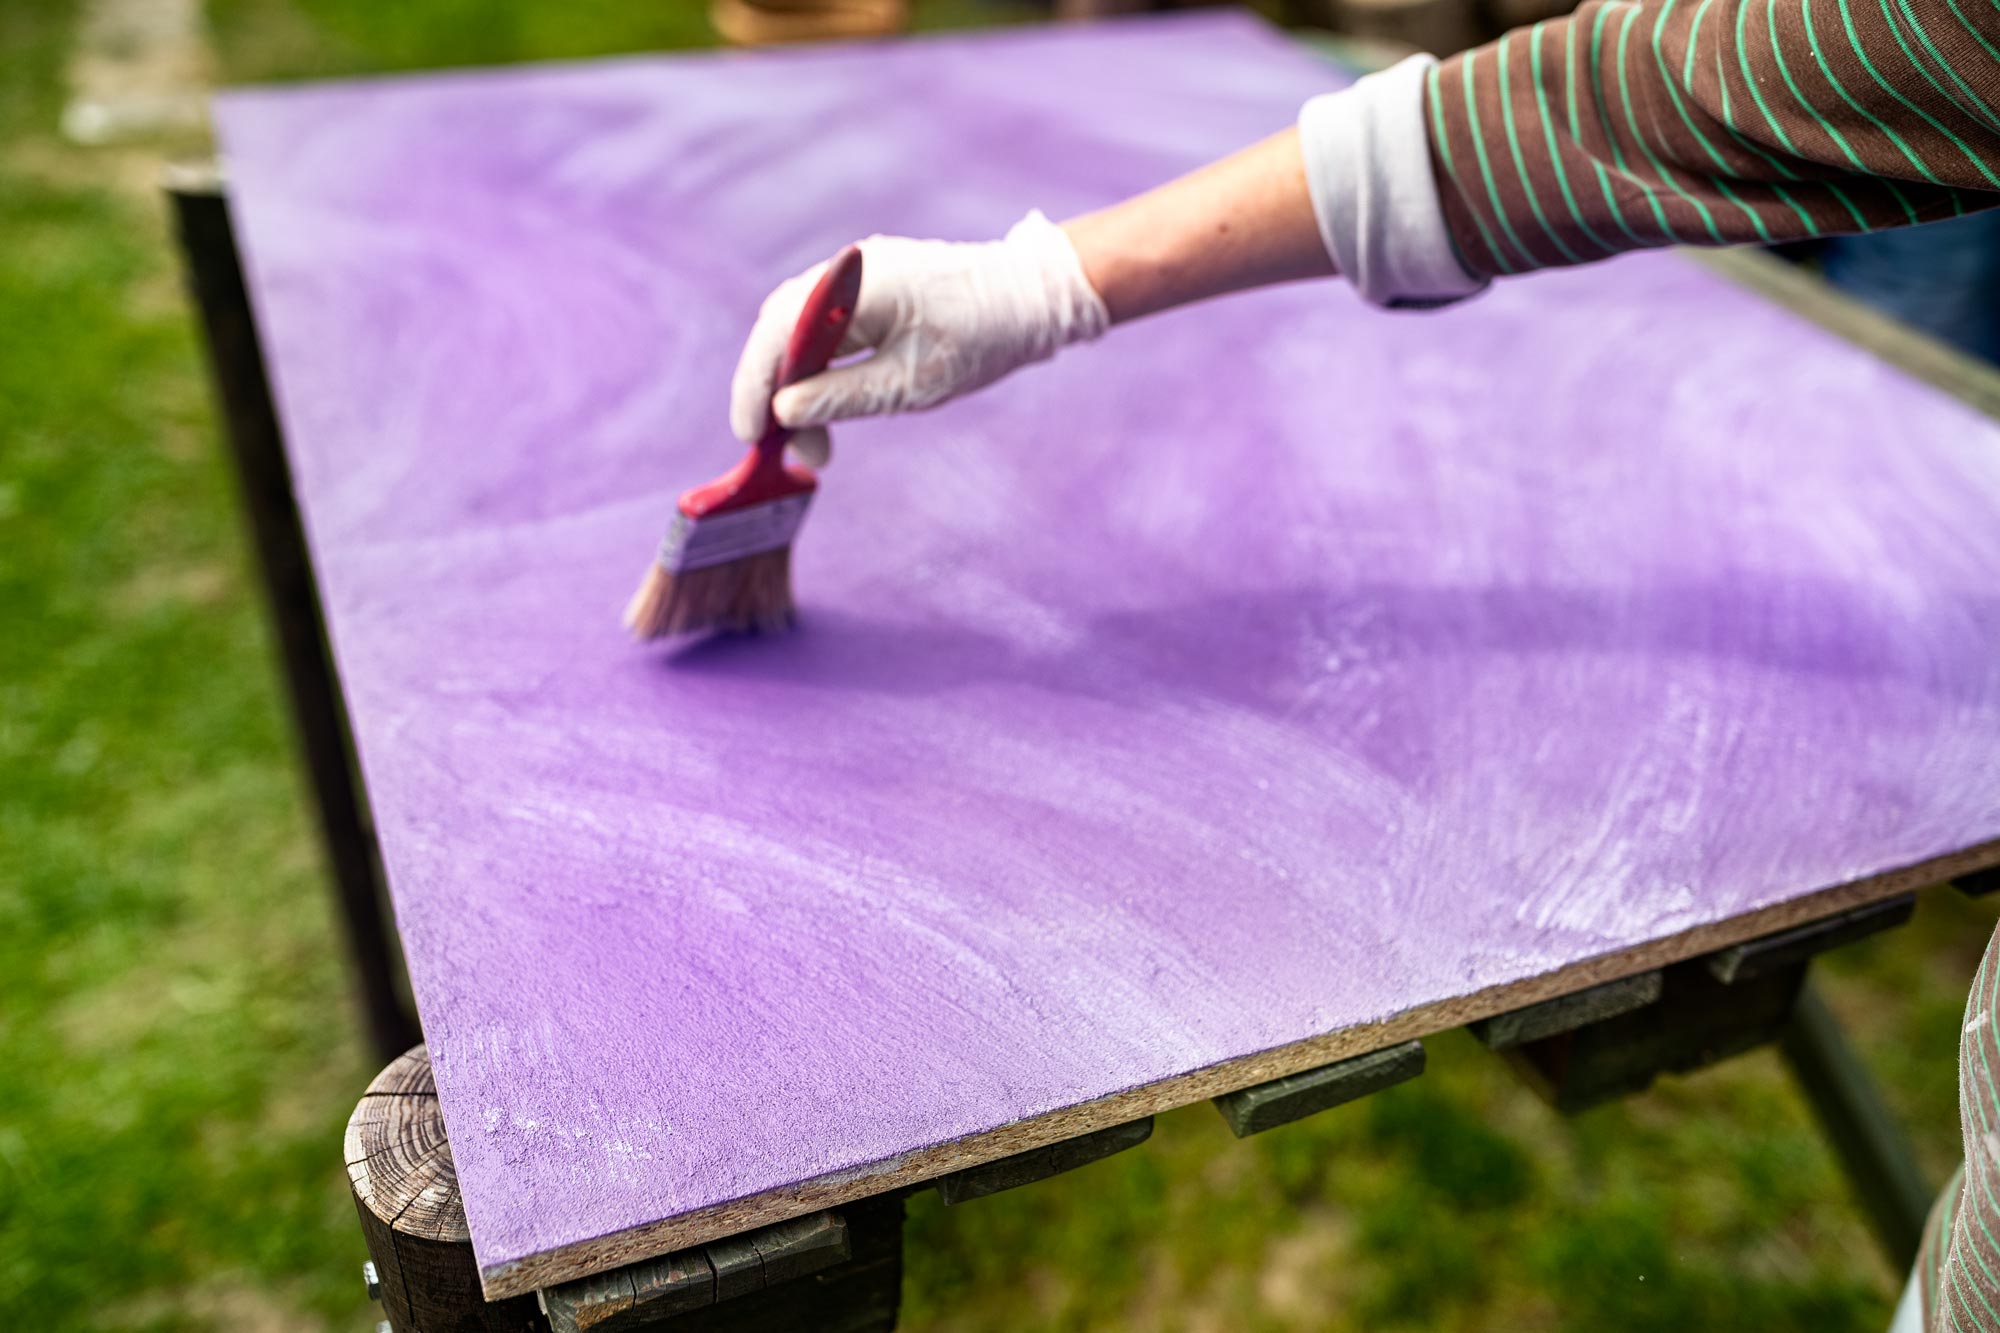 Building photographic backgrounds. A hand with a painting brush is shown, blurred in the background a half painted piece of wood.